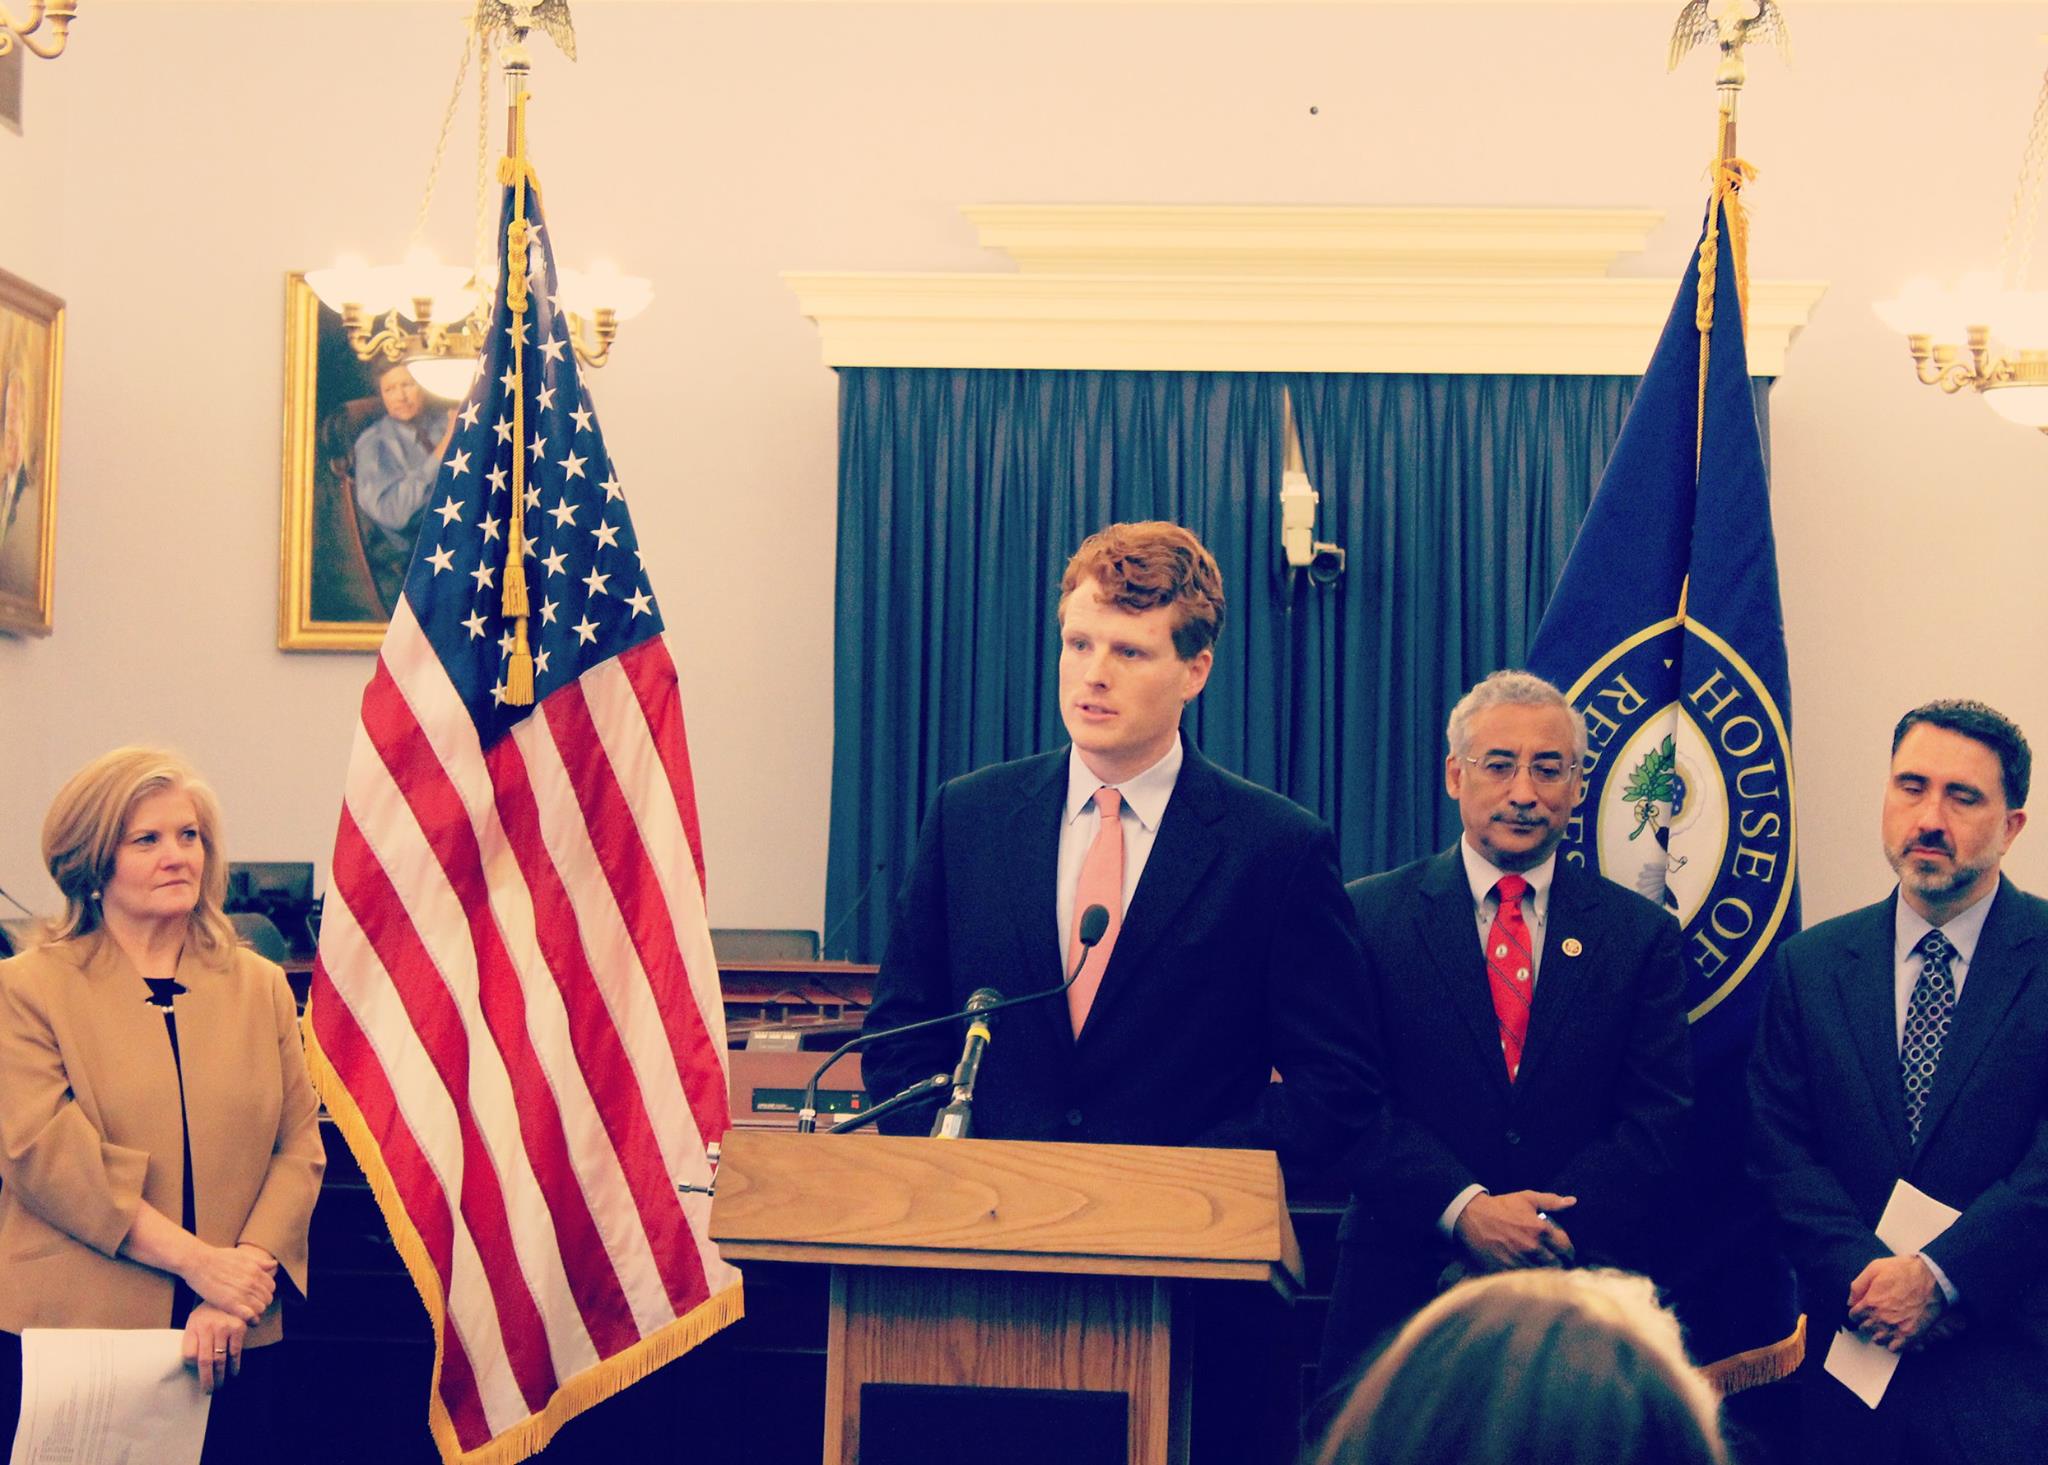 Democrats Re-Introduce “Do No Harm Act” to Correct the Overreach of RFRA